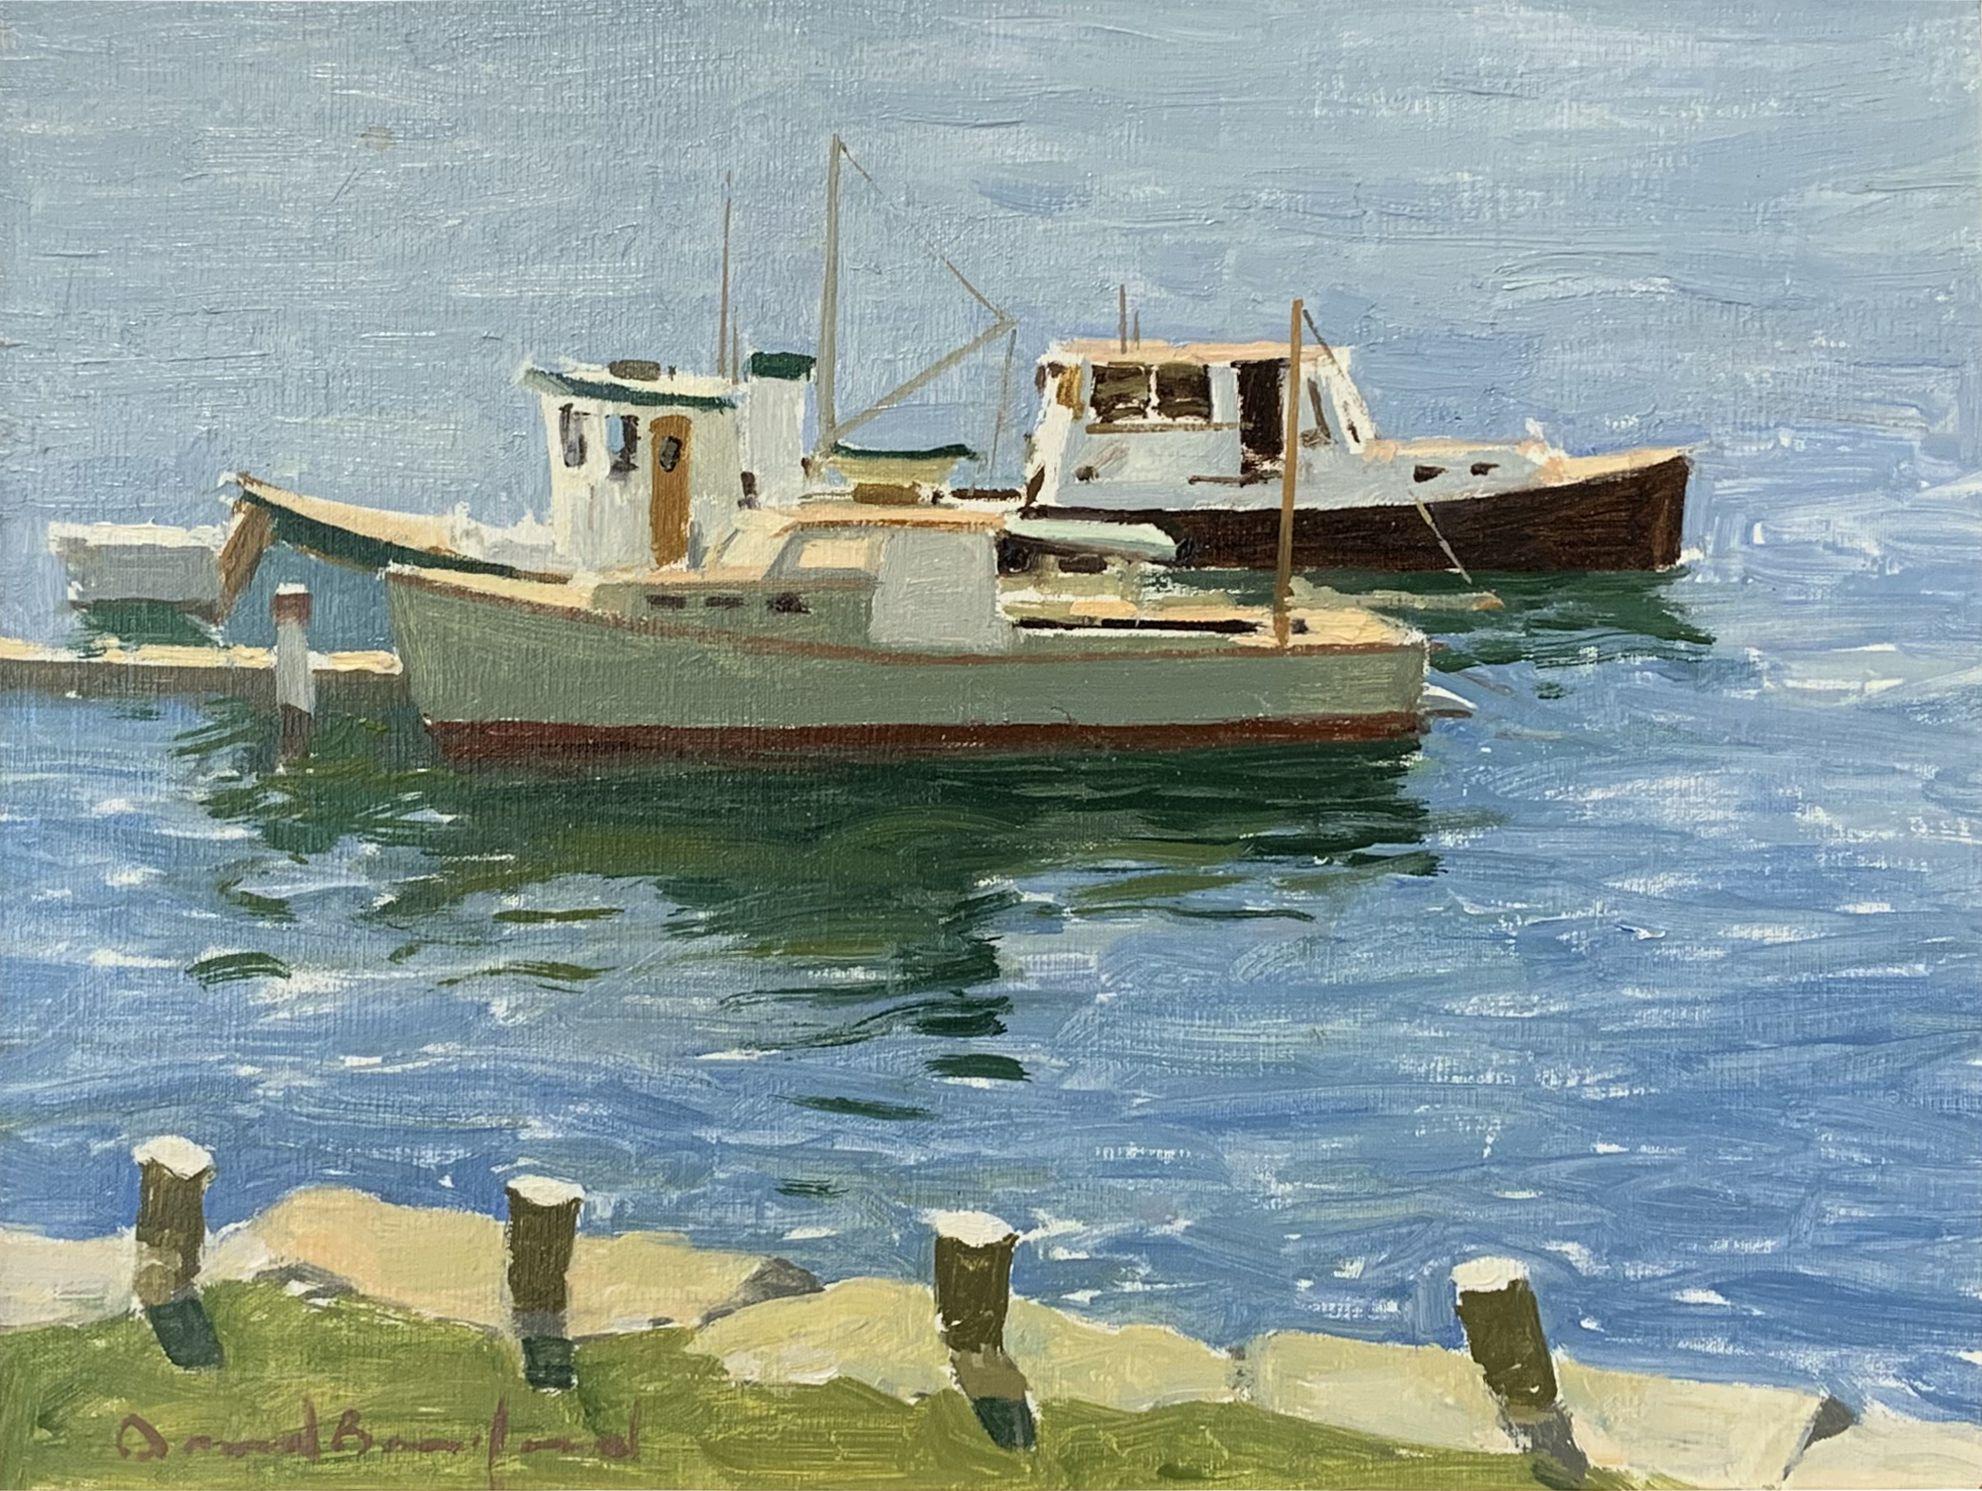 Noank Lobster Dock - Painting by David Bareford